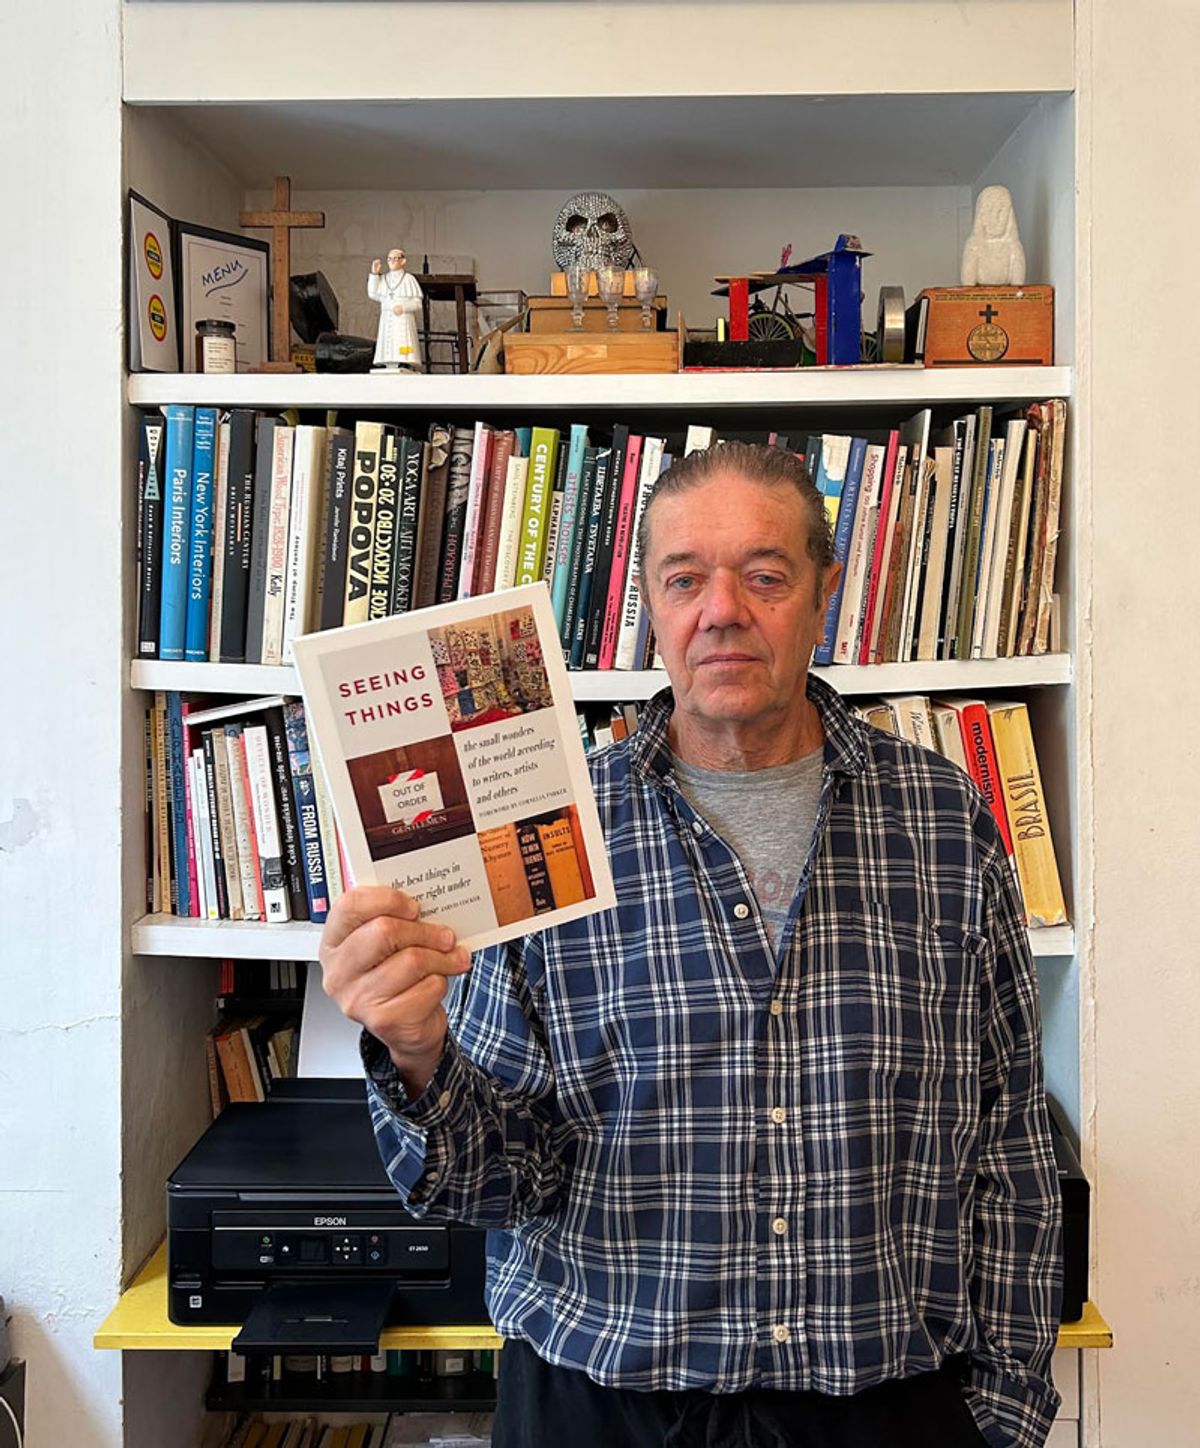 Julian Rothenstein with his latest publication Seeing Things